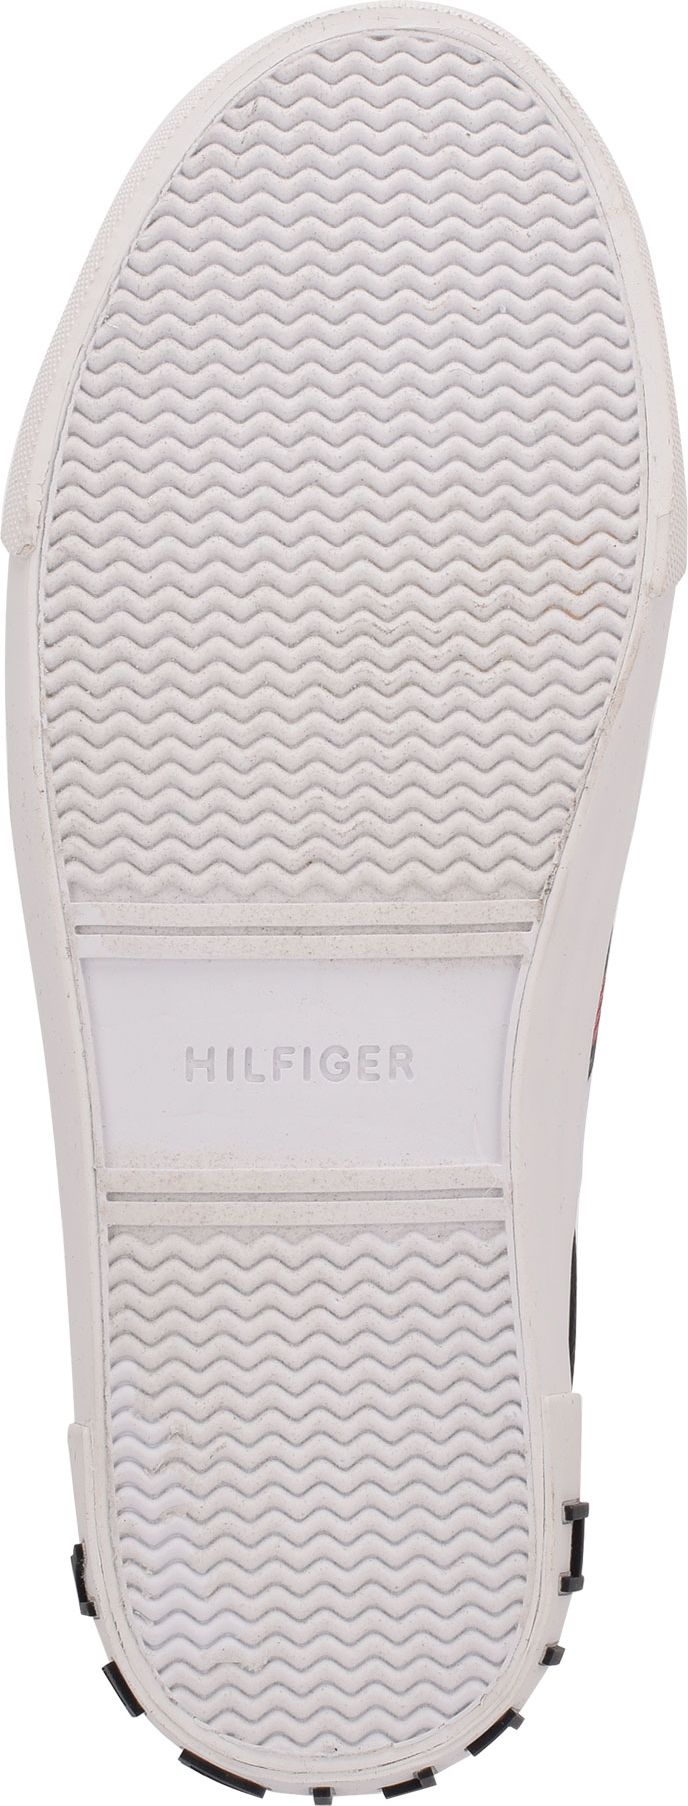 Tommy Hilfiger Shoes Hanks Leather Like White